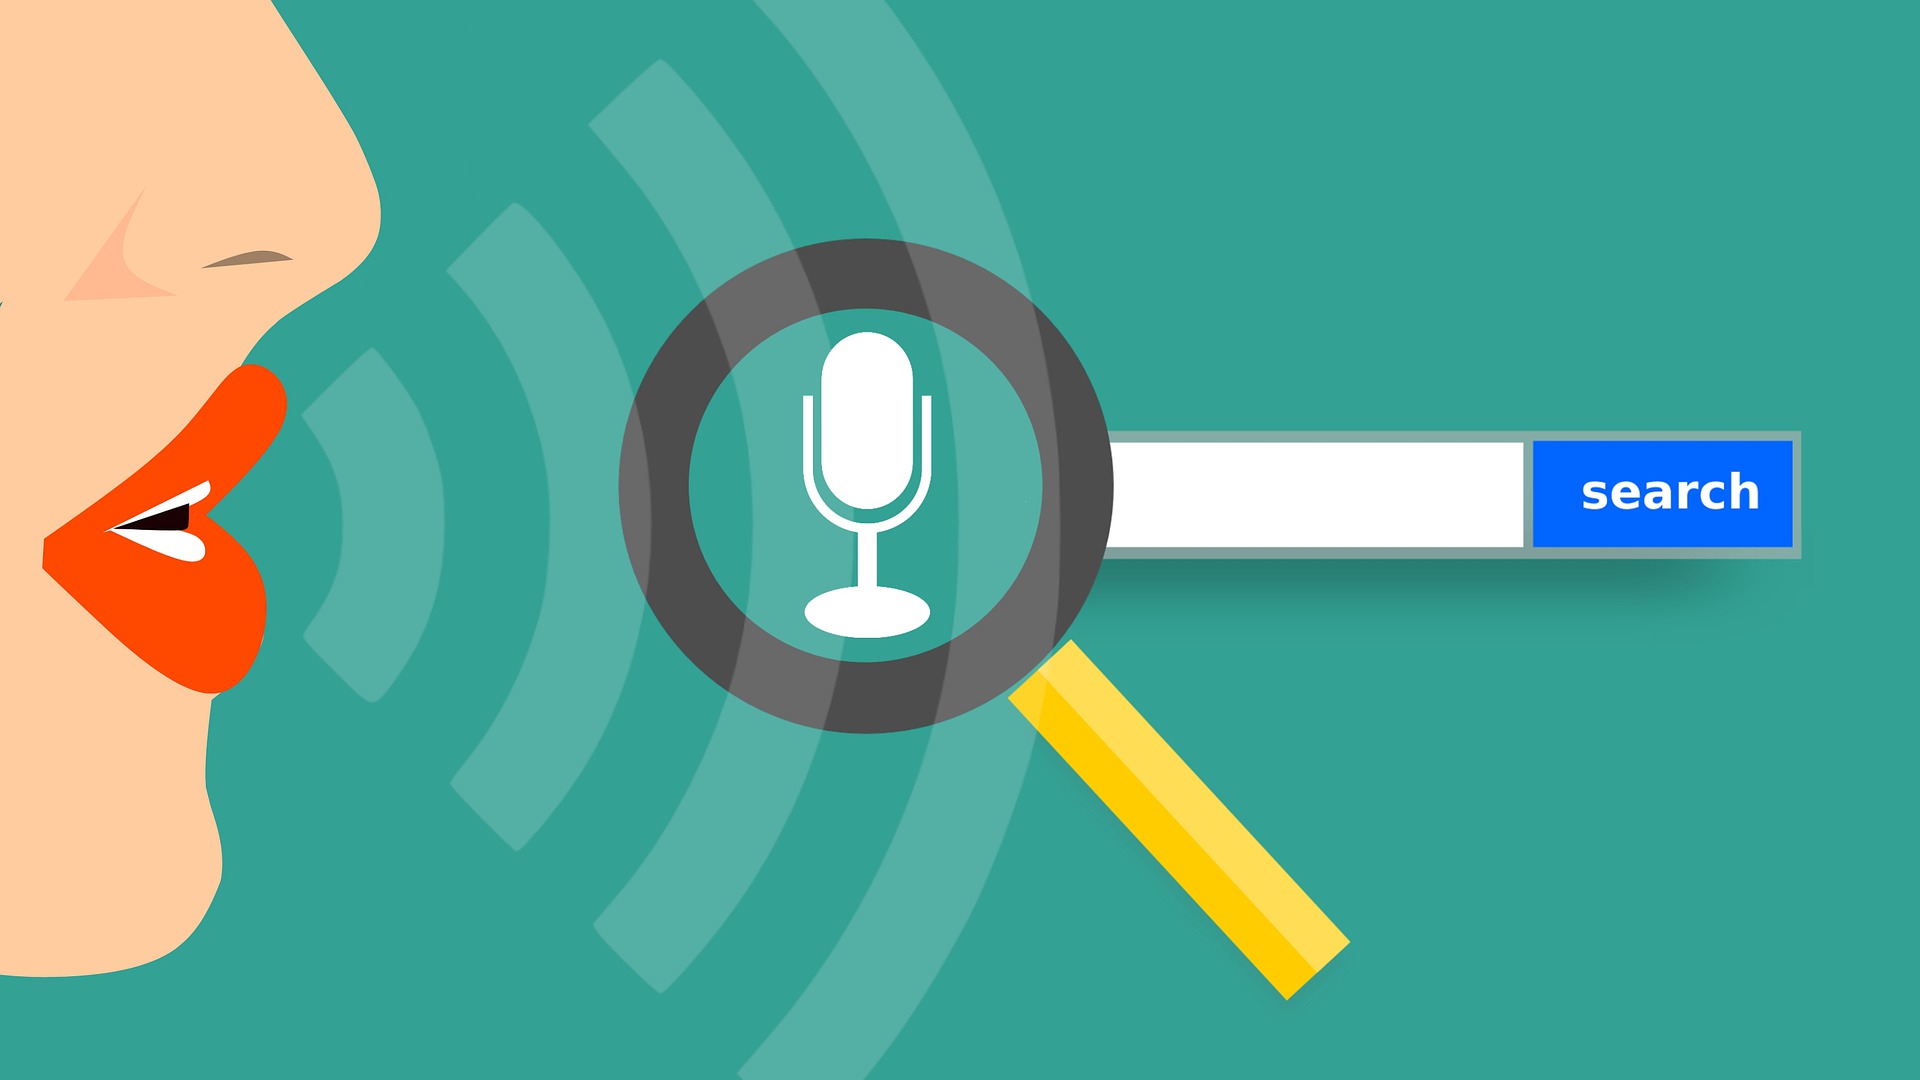 Learn how to use voice search in your business content plan.